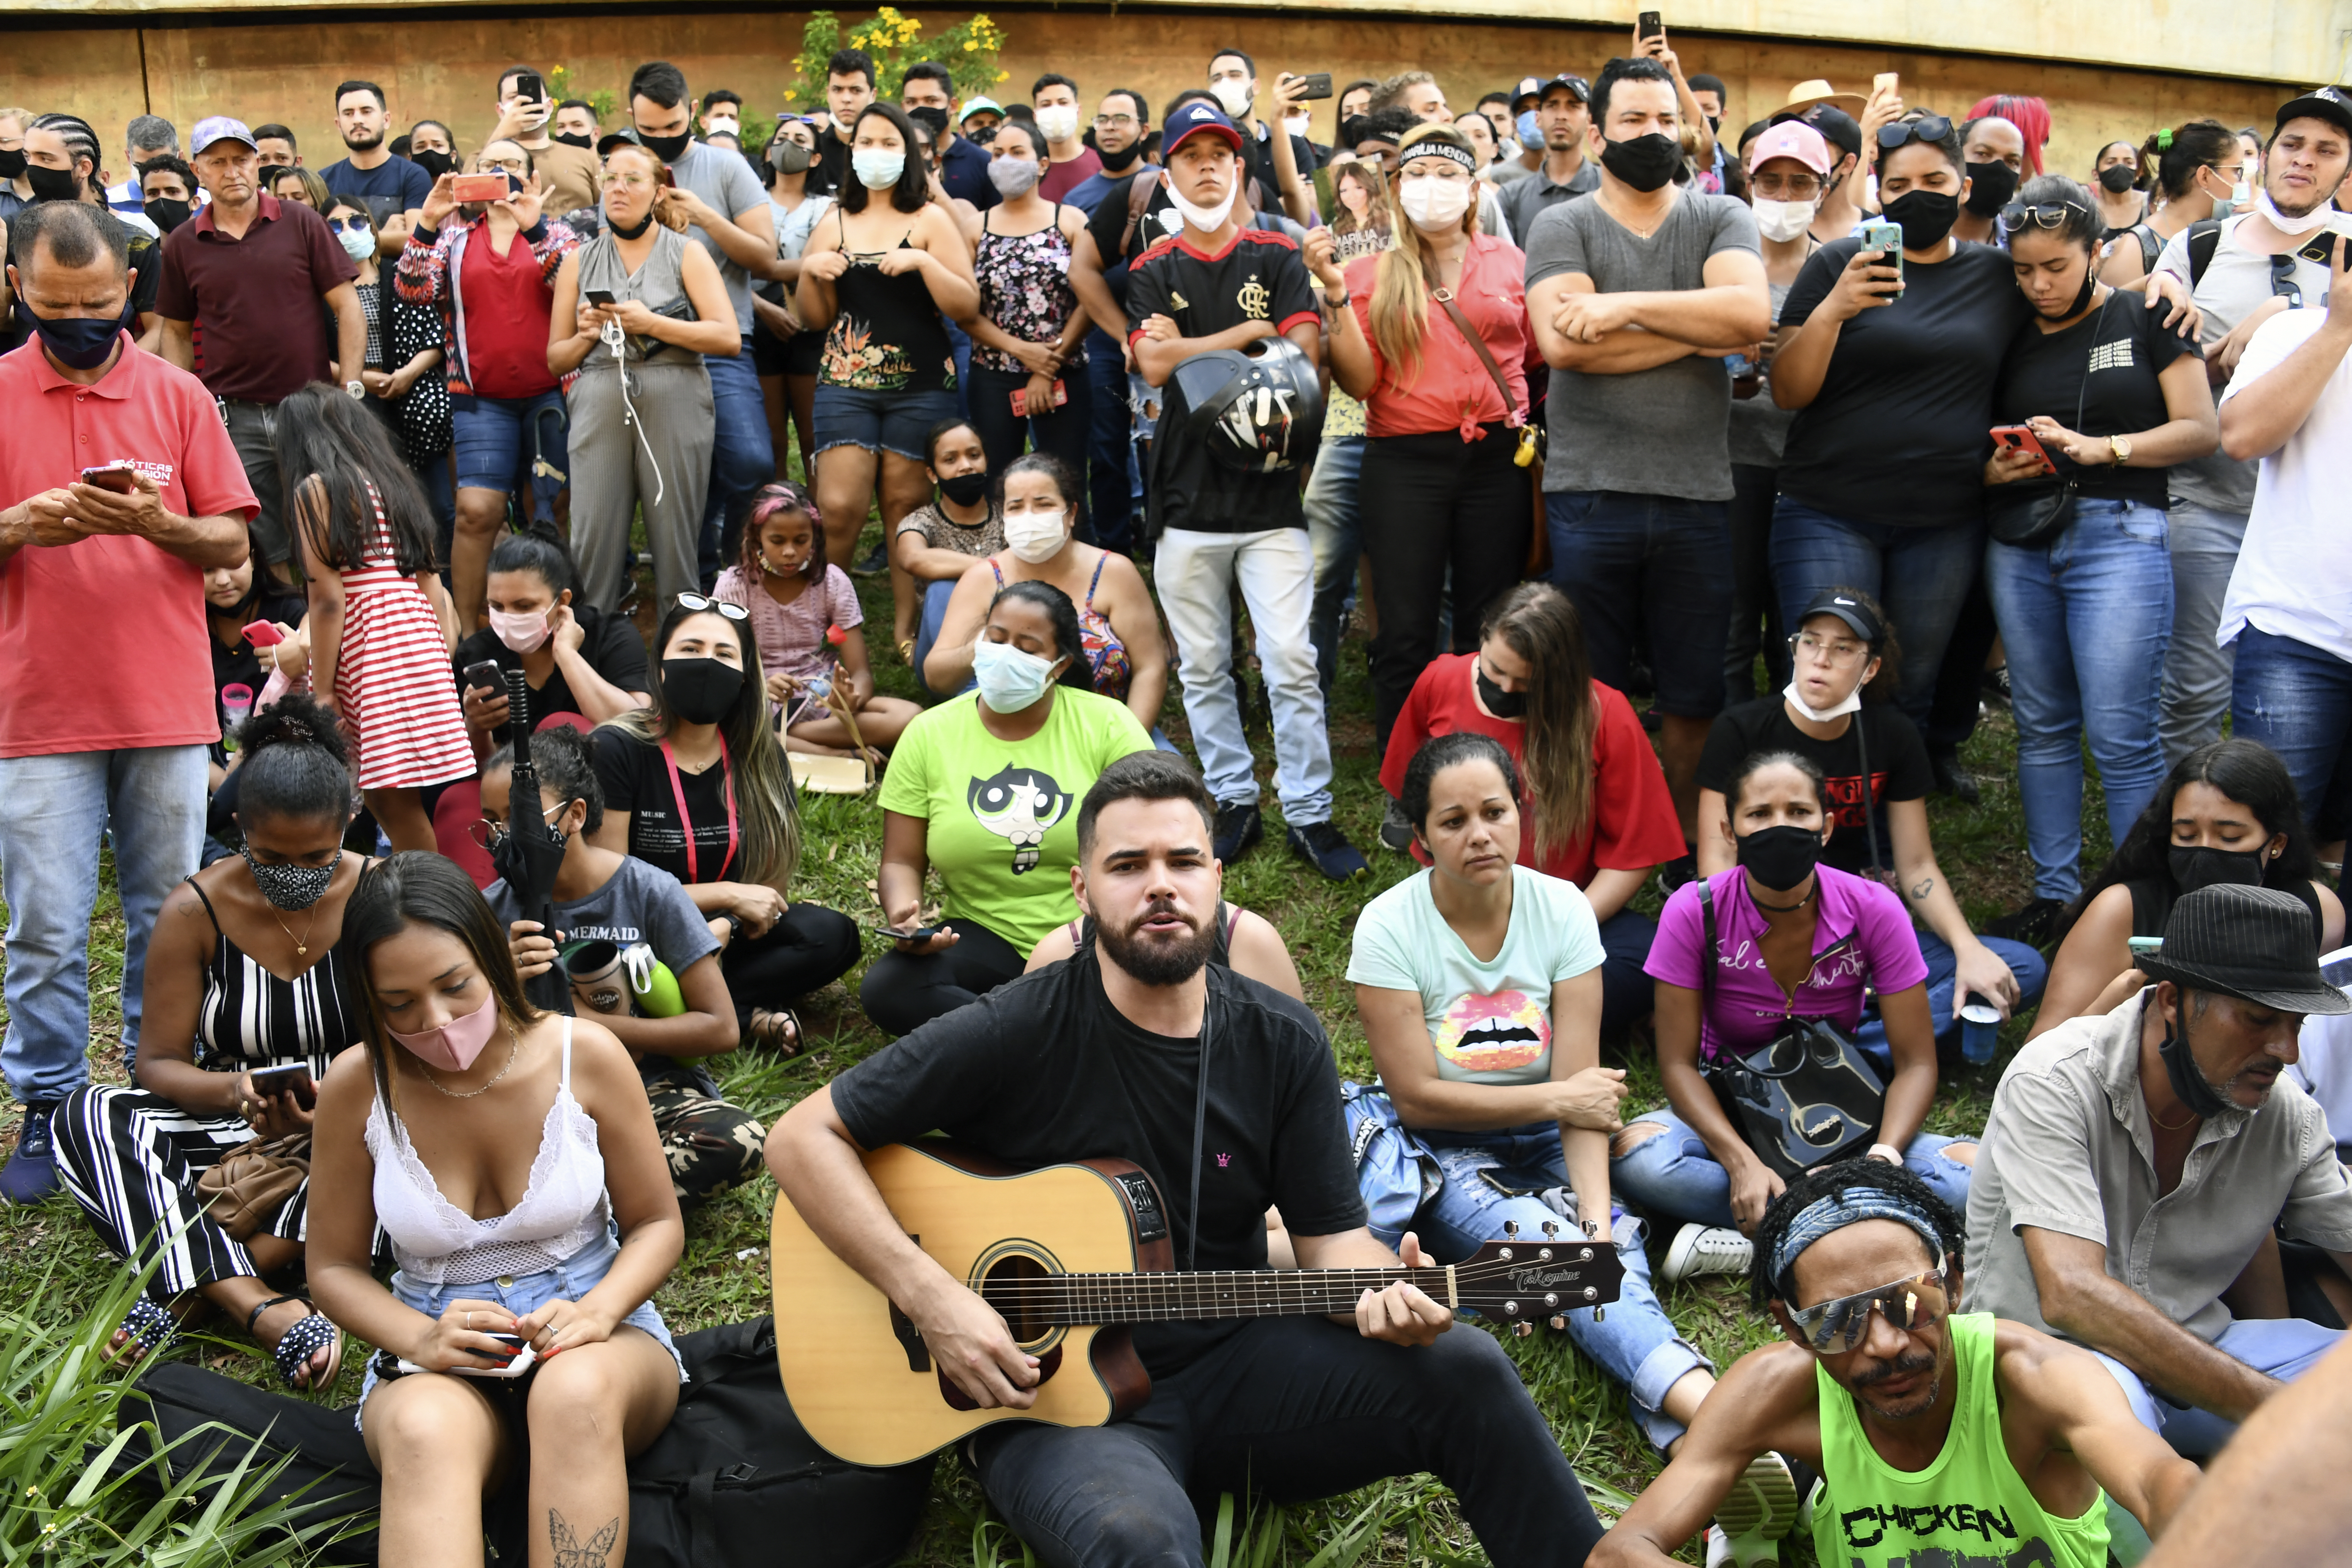 Fans gather outside the Arena Goiania sports centre during the wake of Brazilian singer Marilia Mendonca, in Goiania, state of Goias, Brazil, on November 6, 2021. - Marilia Mendonca, 26, one of the most popular of the 